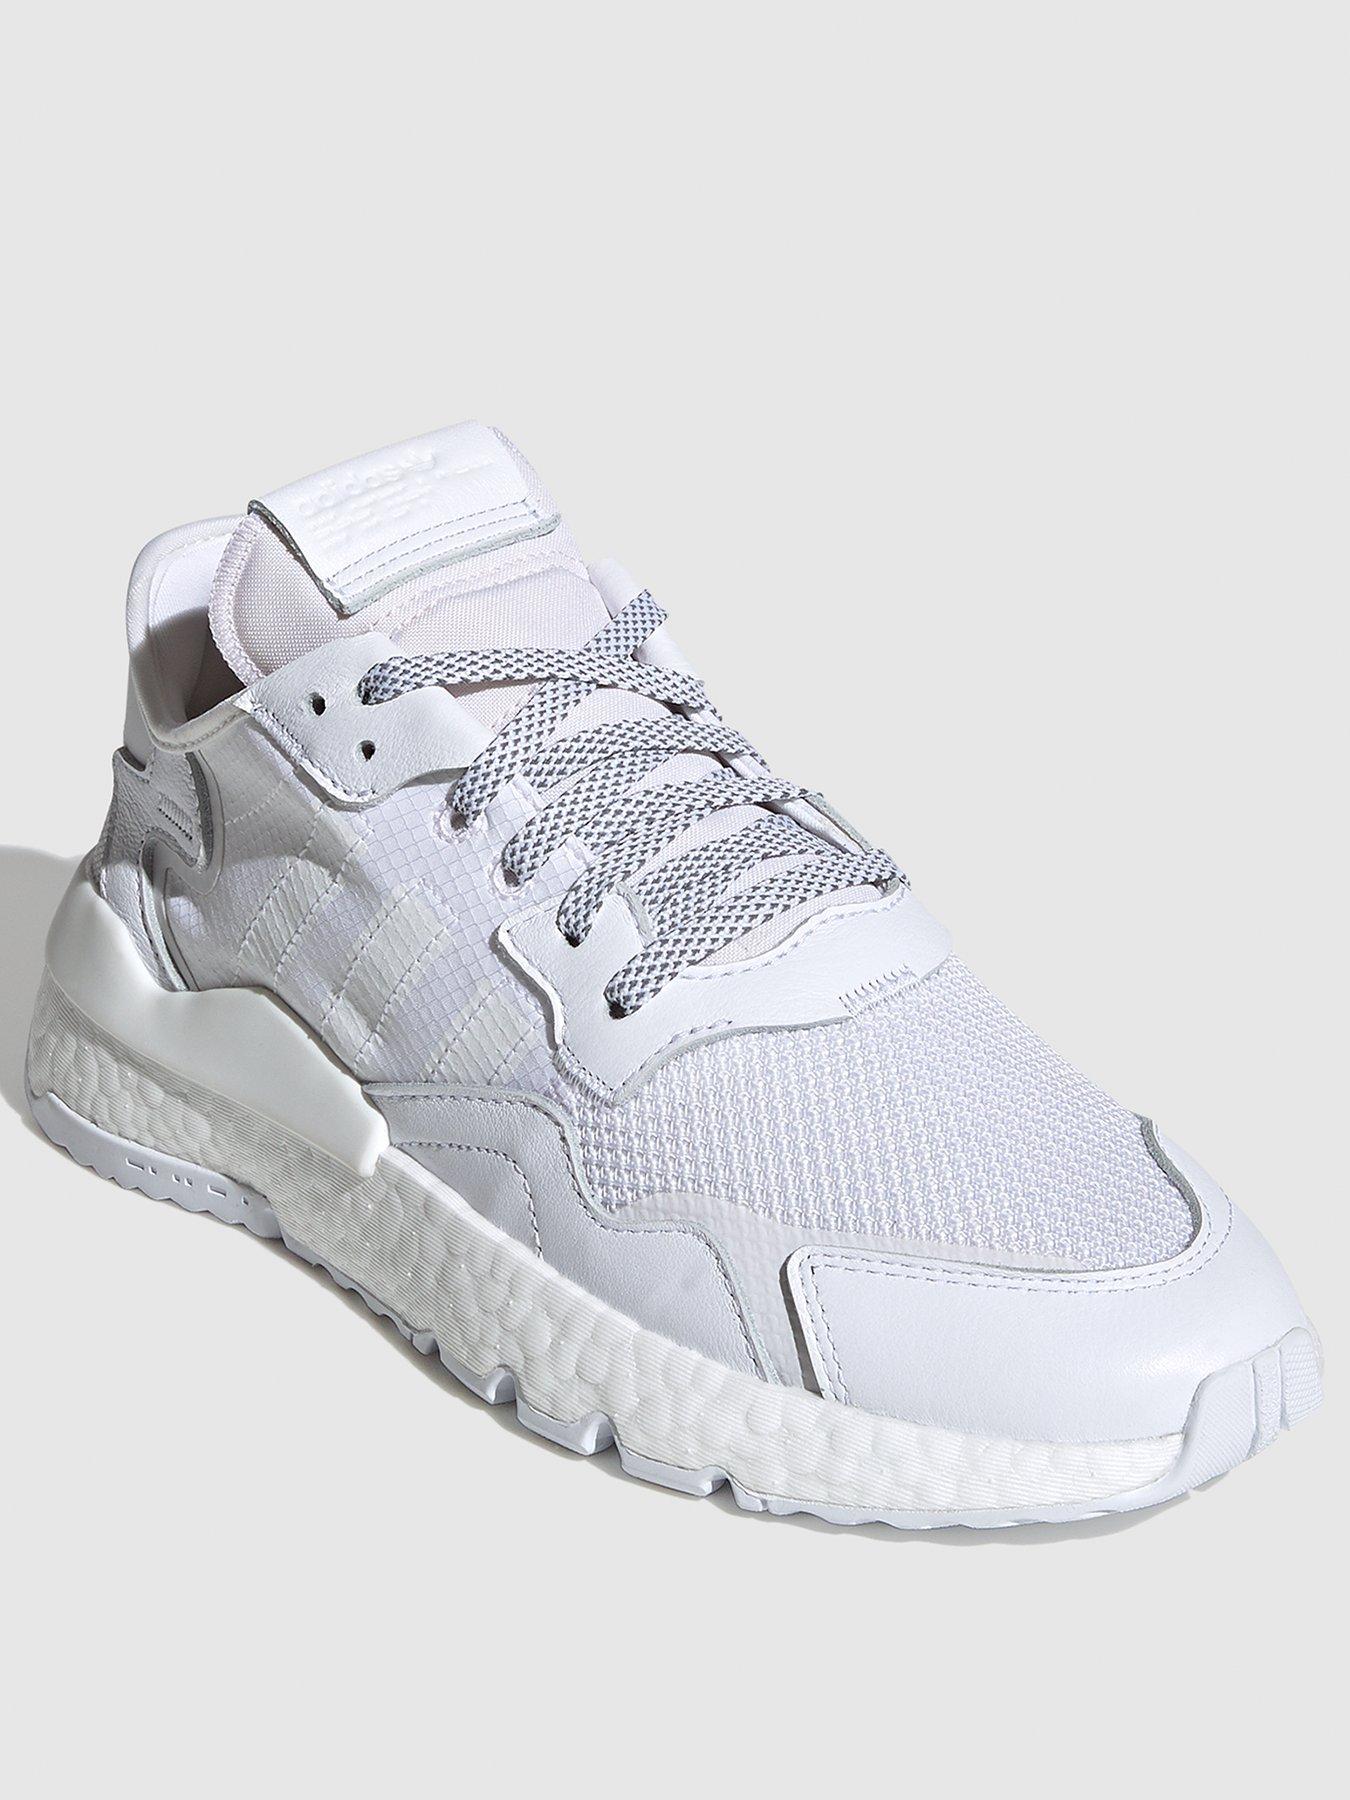 jogger trainers